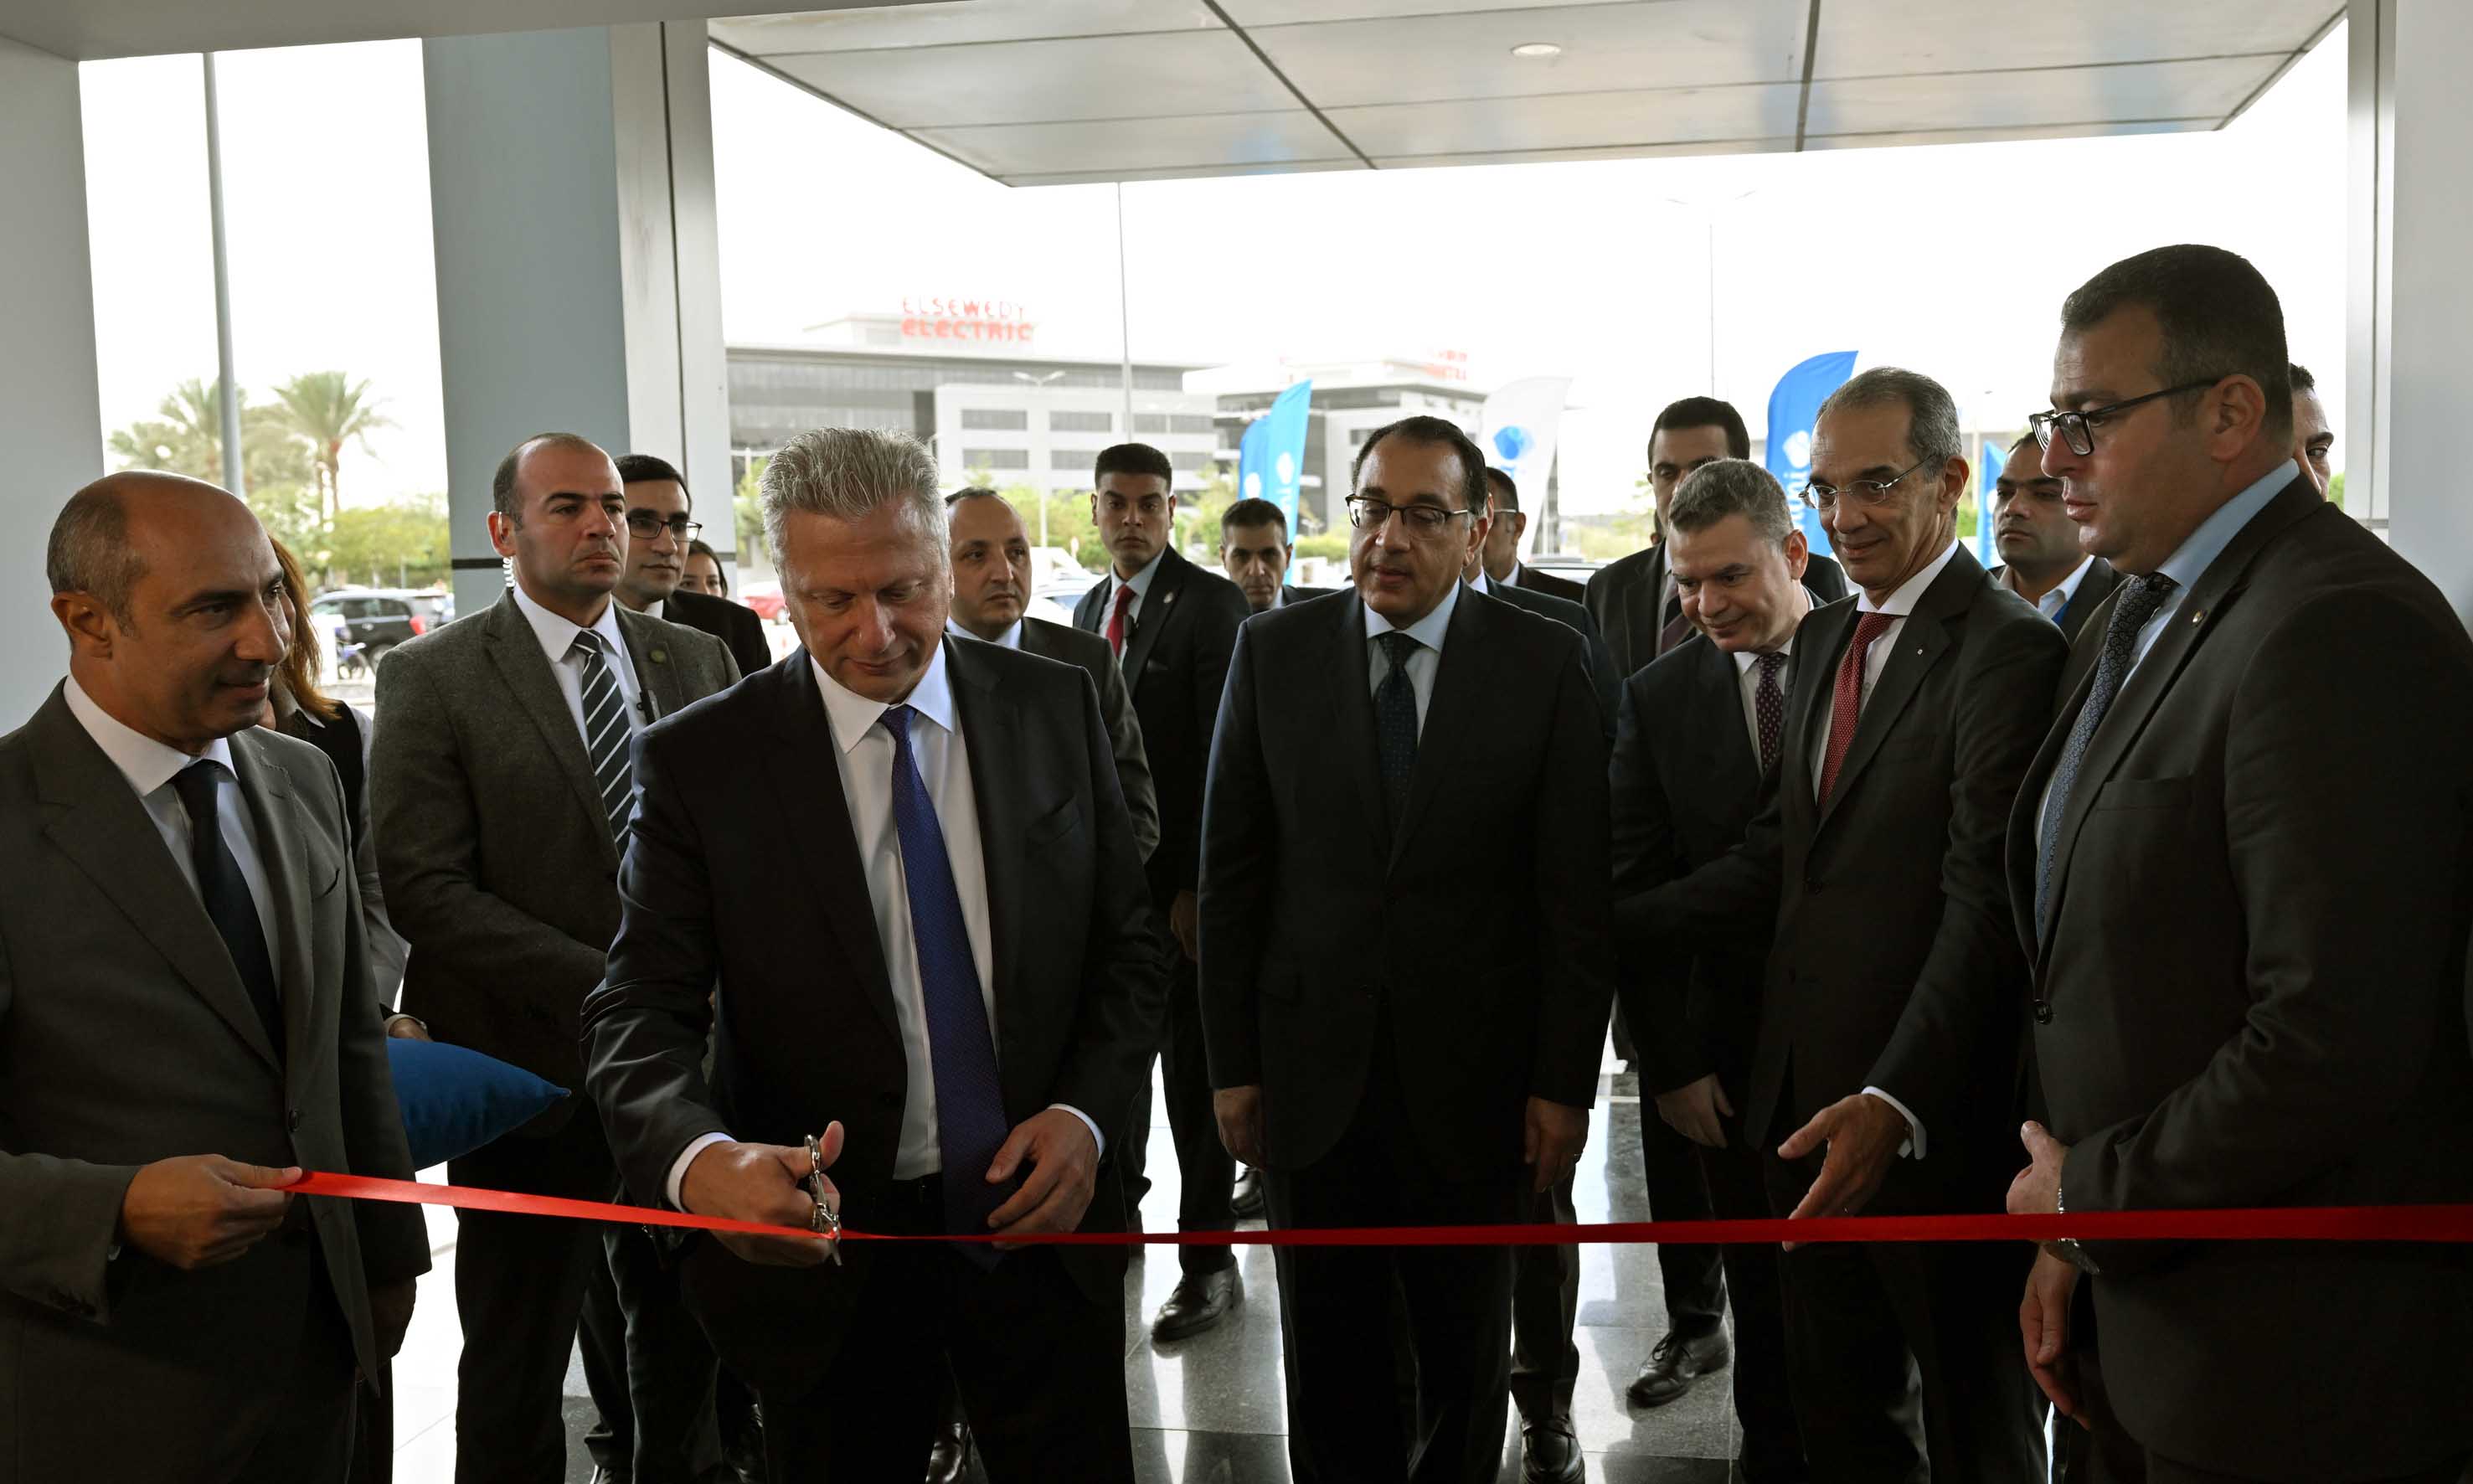 Madbouly inaugurates the headquarters of Capgemini, which specializes in the fields of consulting, information technology services and outsourcing in Egypt